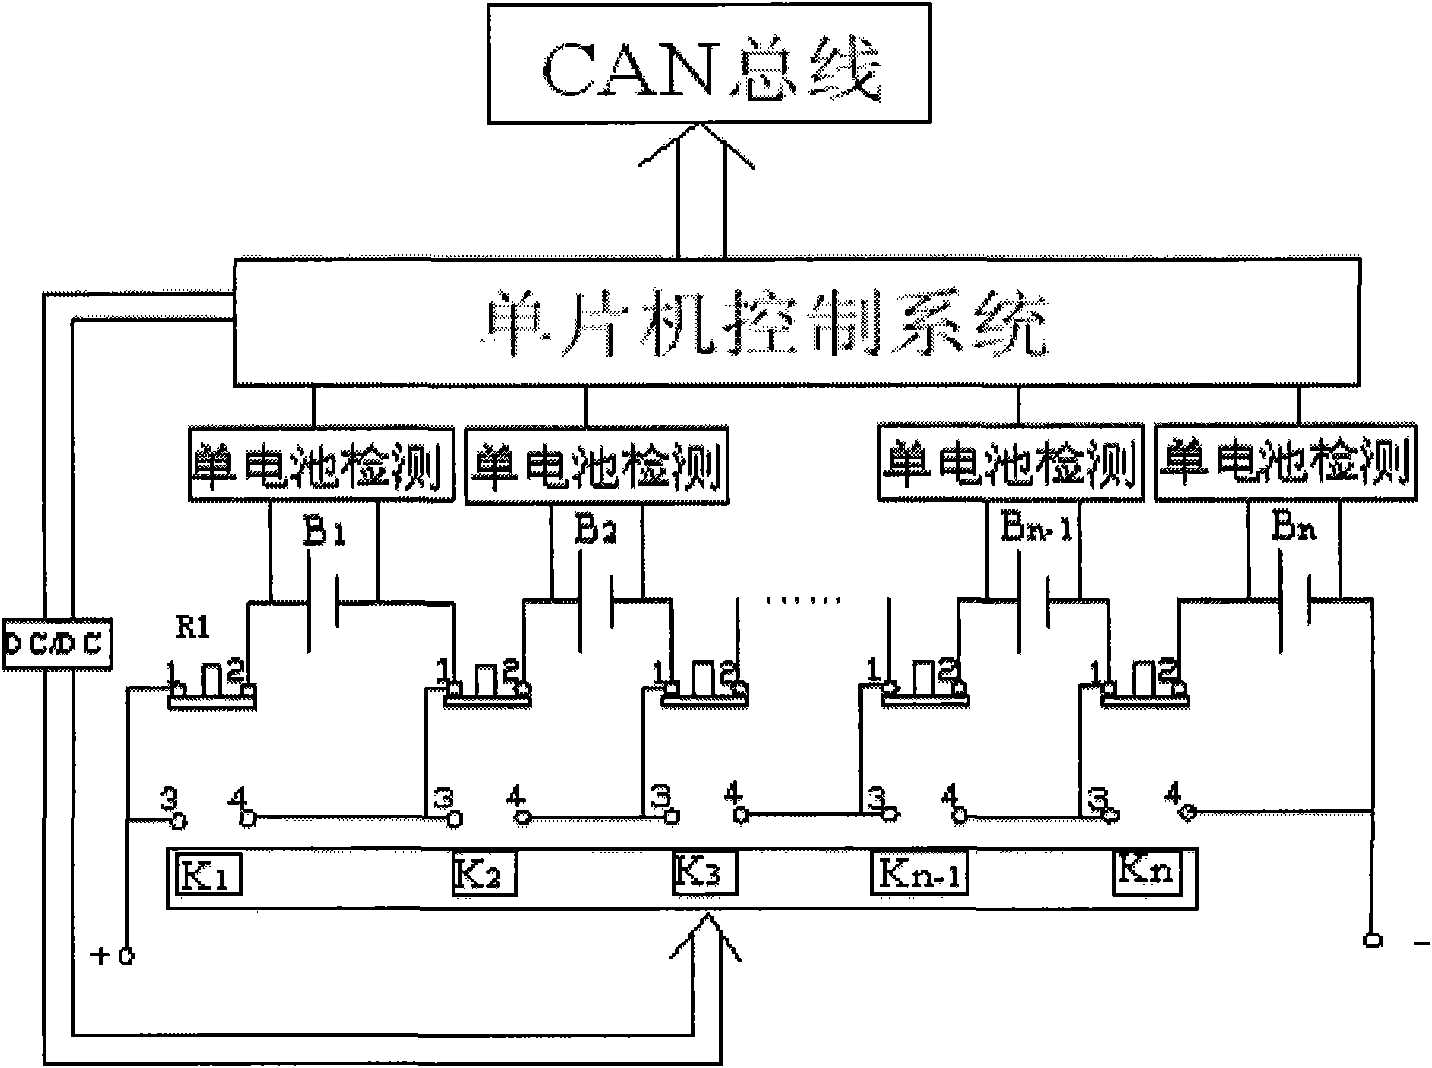 Single battery control system of vehicular power supply